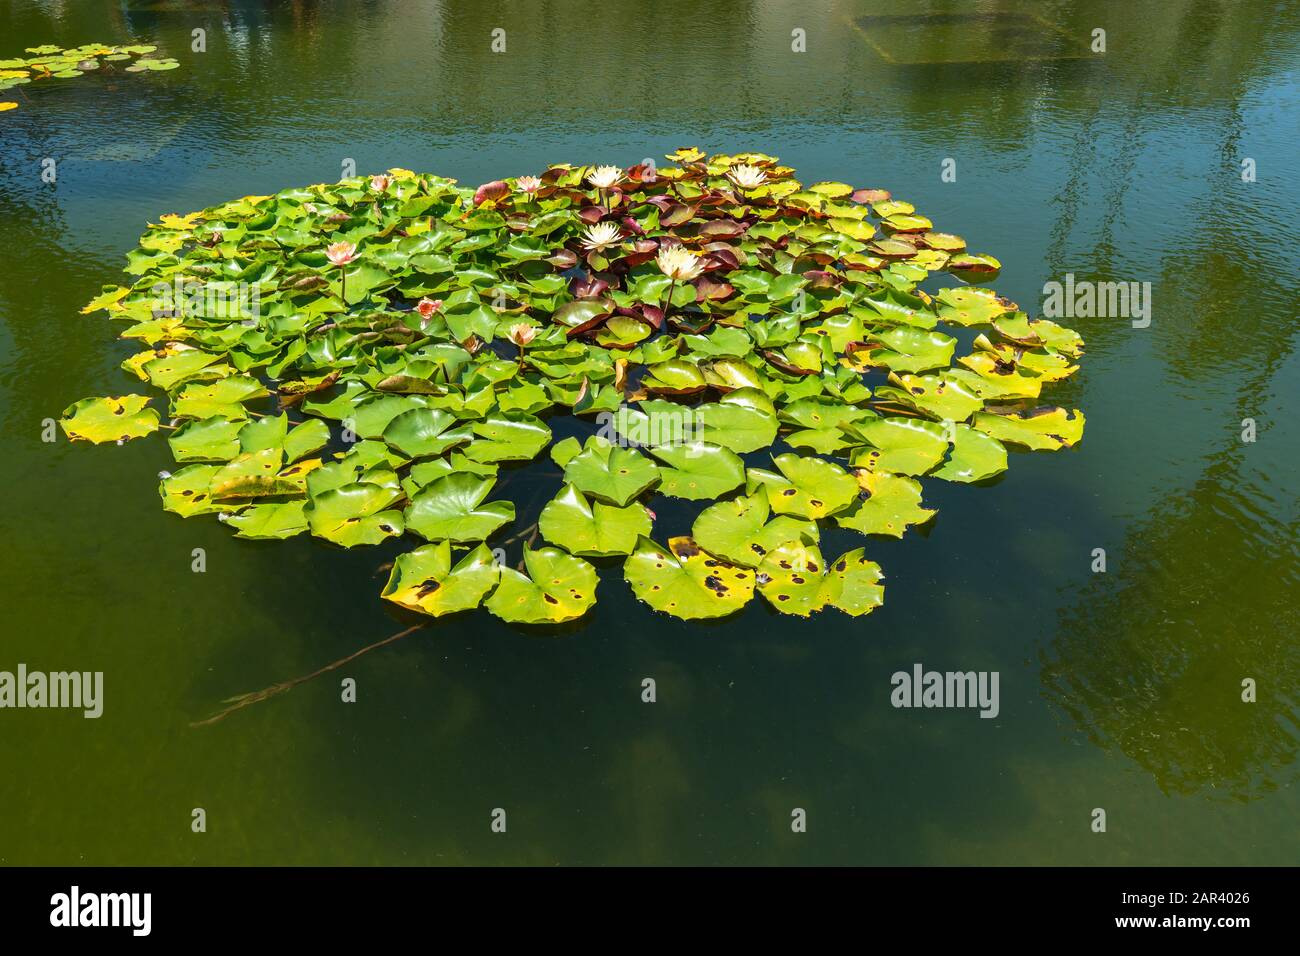 Lily pond with beautiful reflection. Sunny day in Balboa Park, San Diego, California Stock Photo